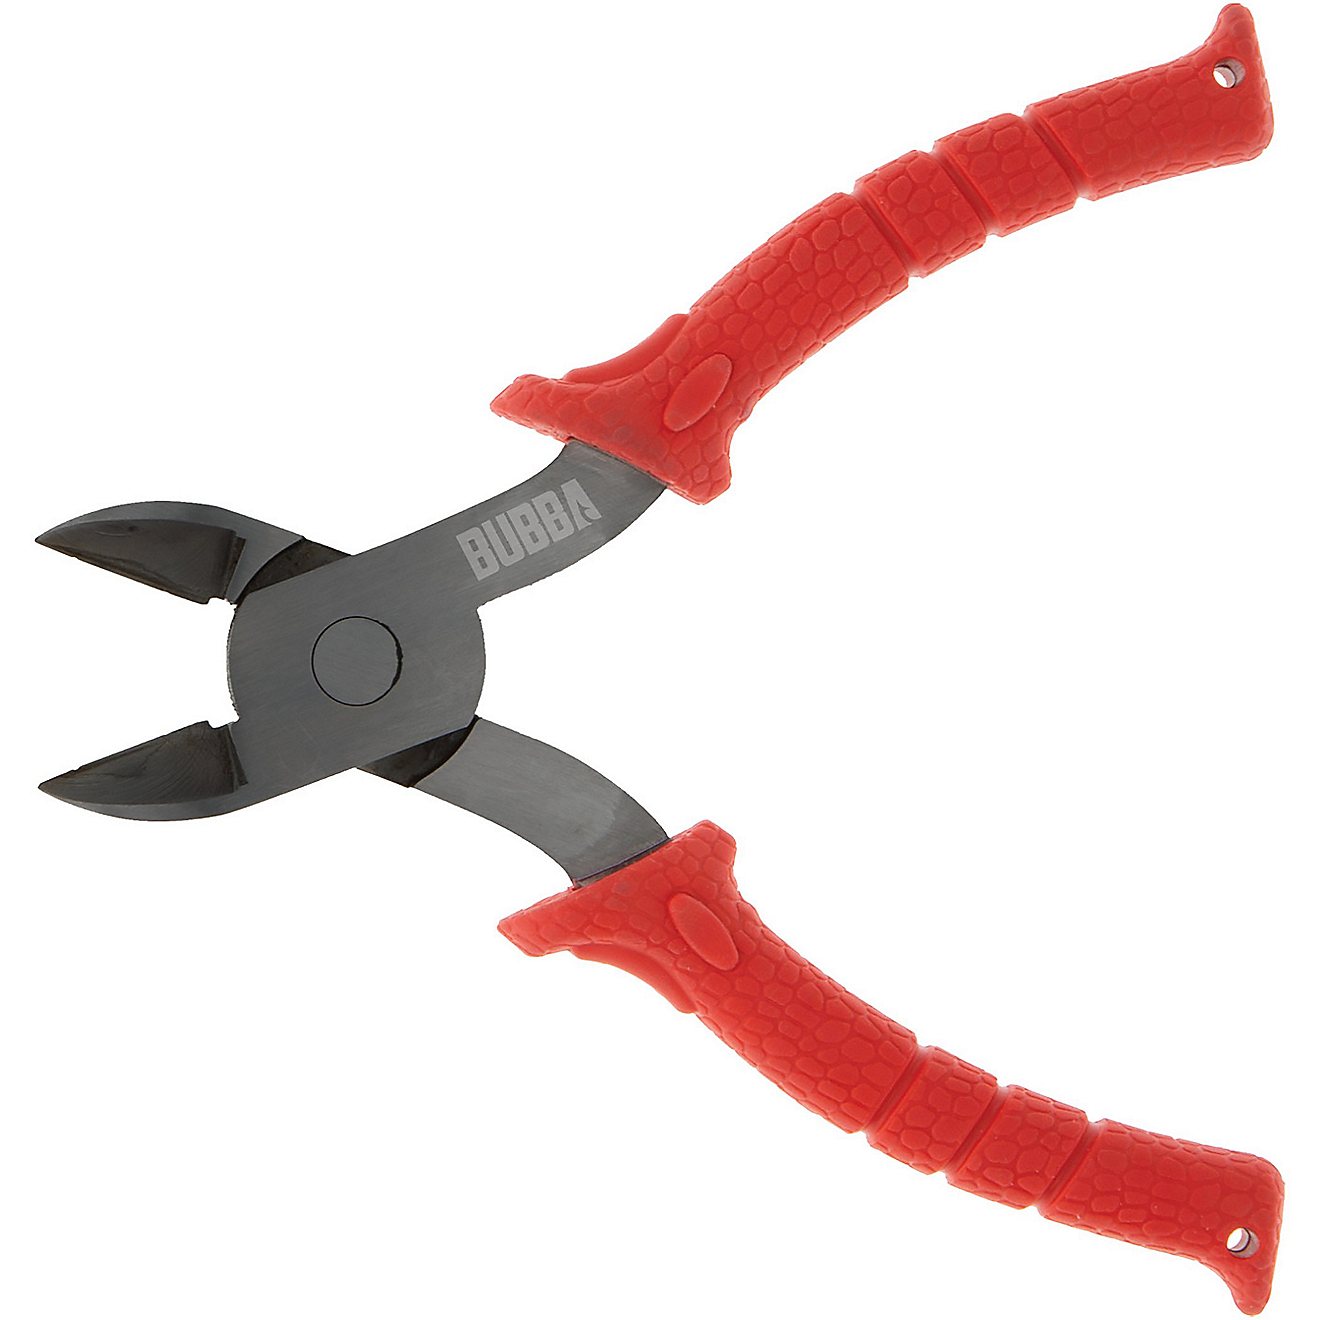 Bubba 7"Wire Snips                                                                                                               - view number 1